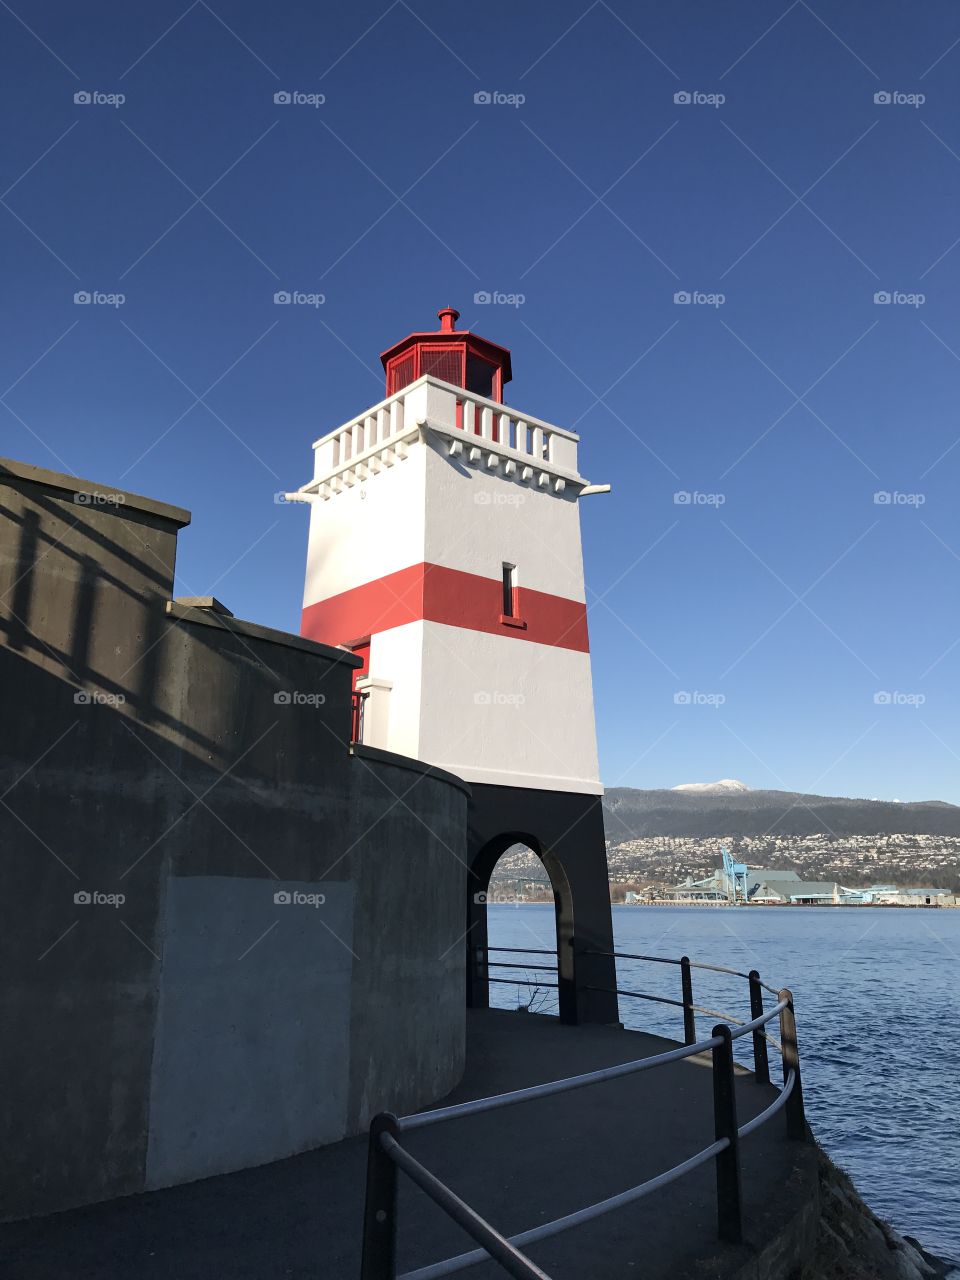 Lighthouse, No Person, Travel, Water, Architecture